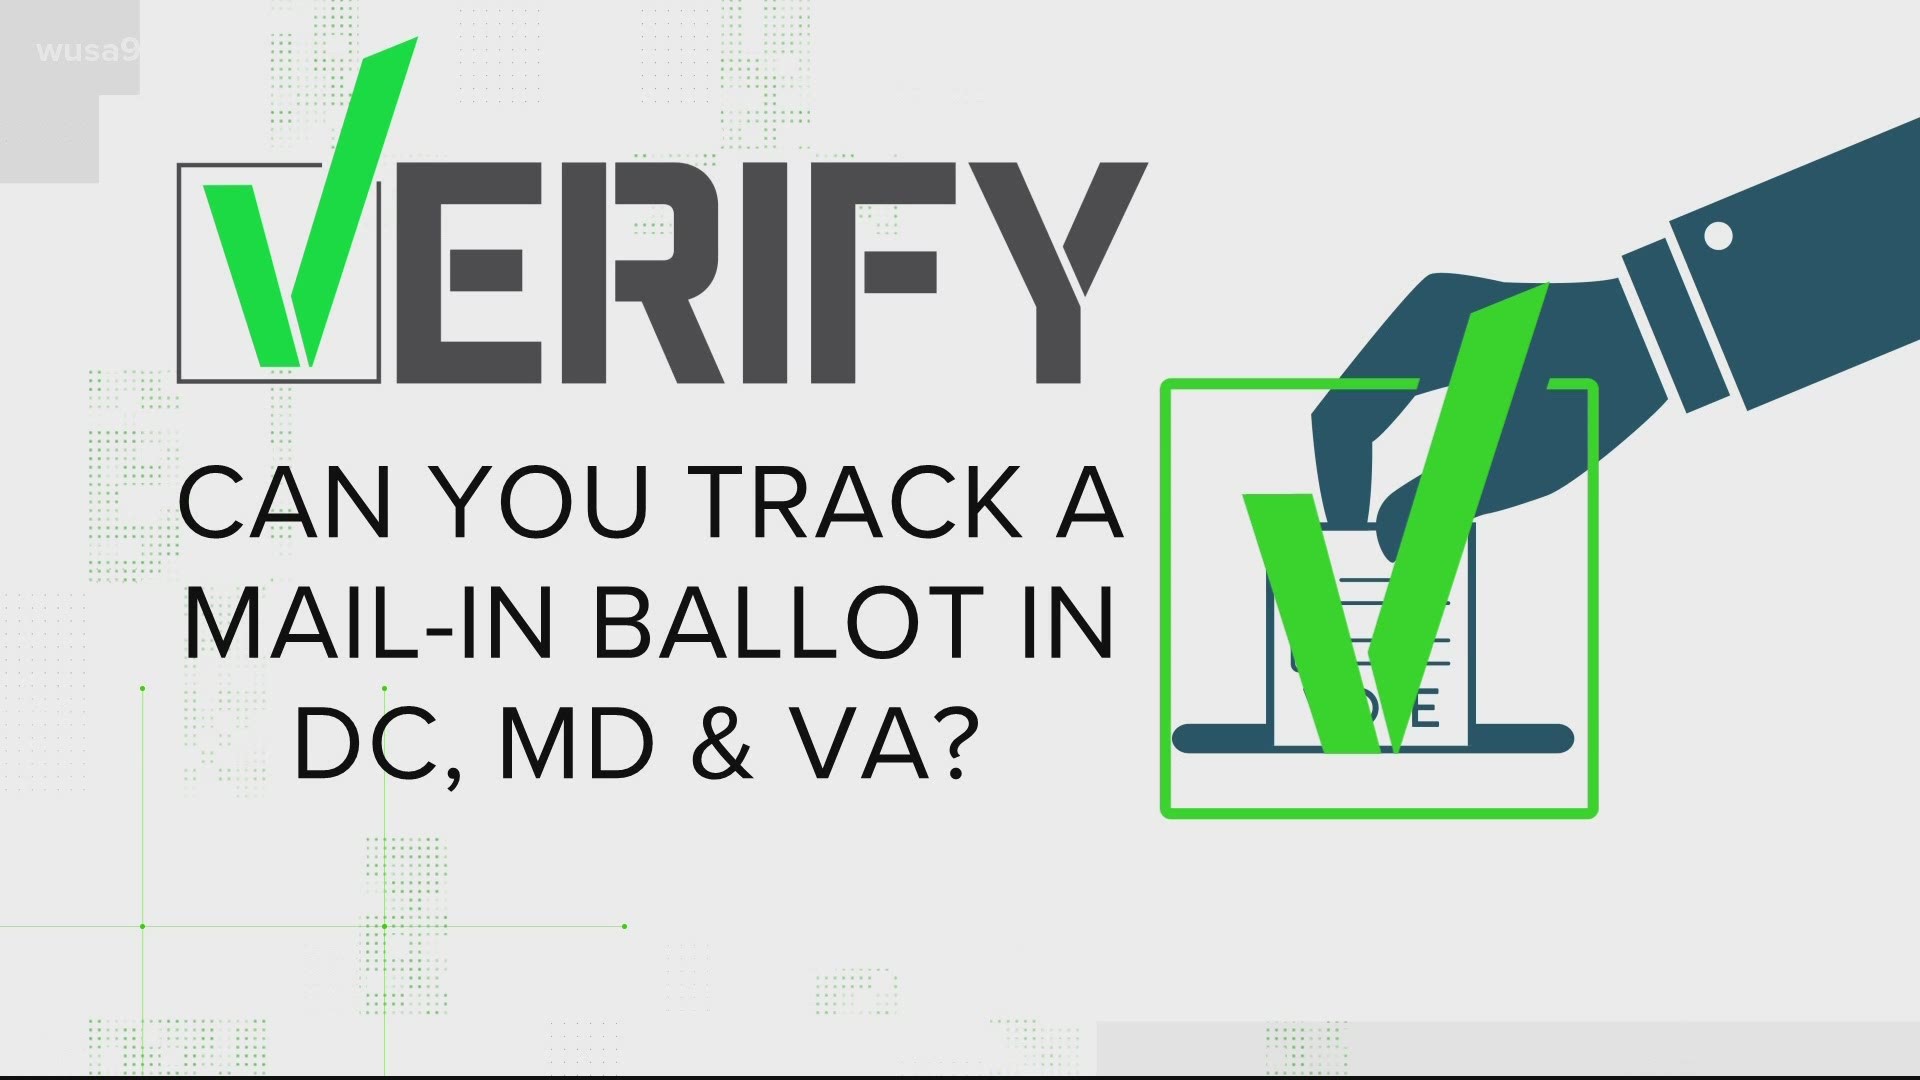 The Verify inbox is flooded with voting questions and concerns from people who want to make sure their vote counts.